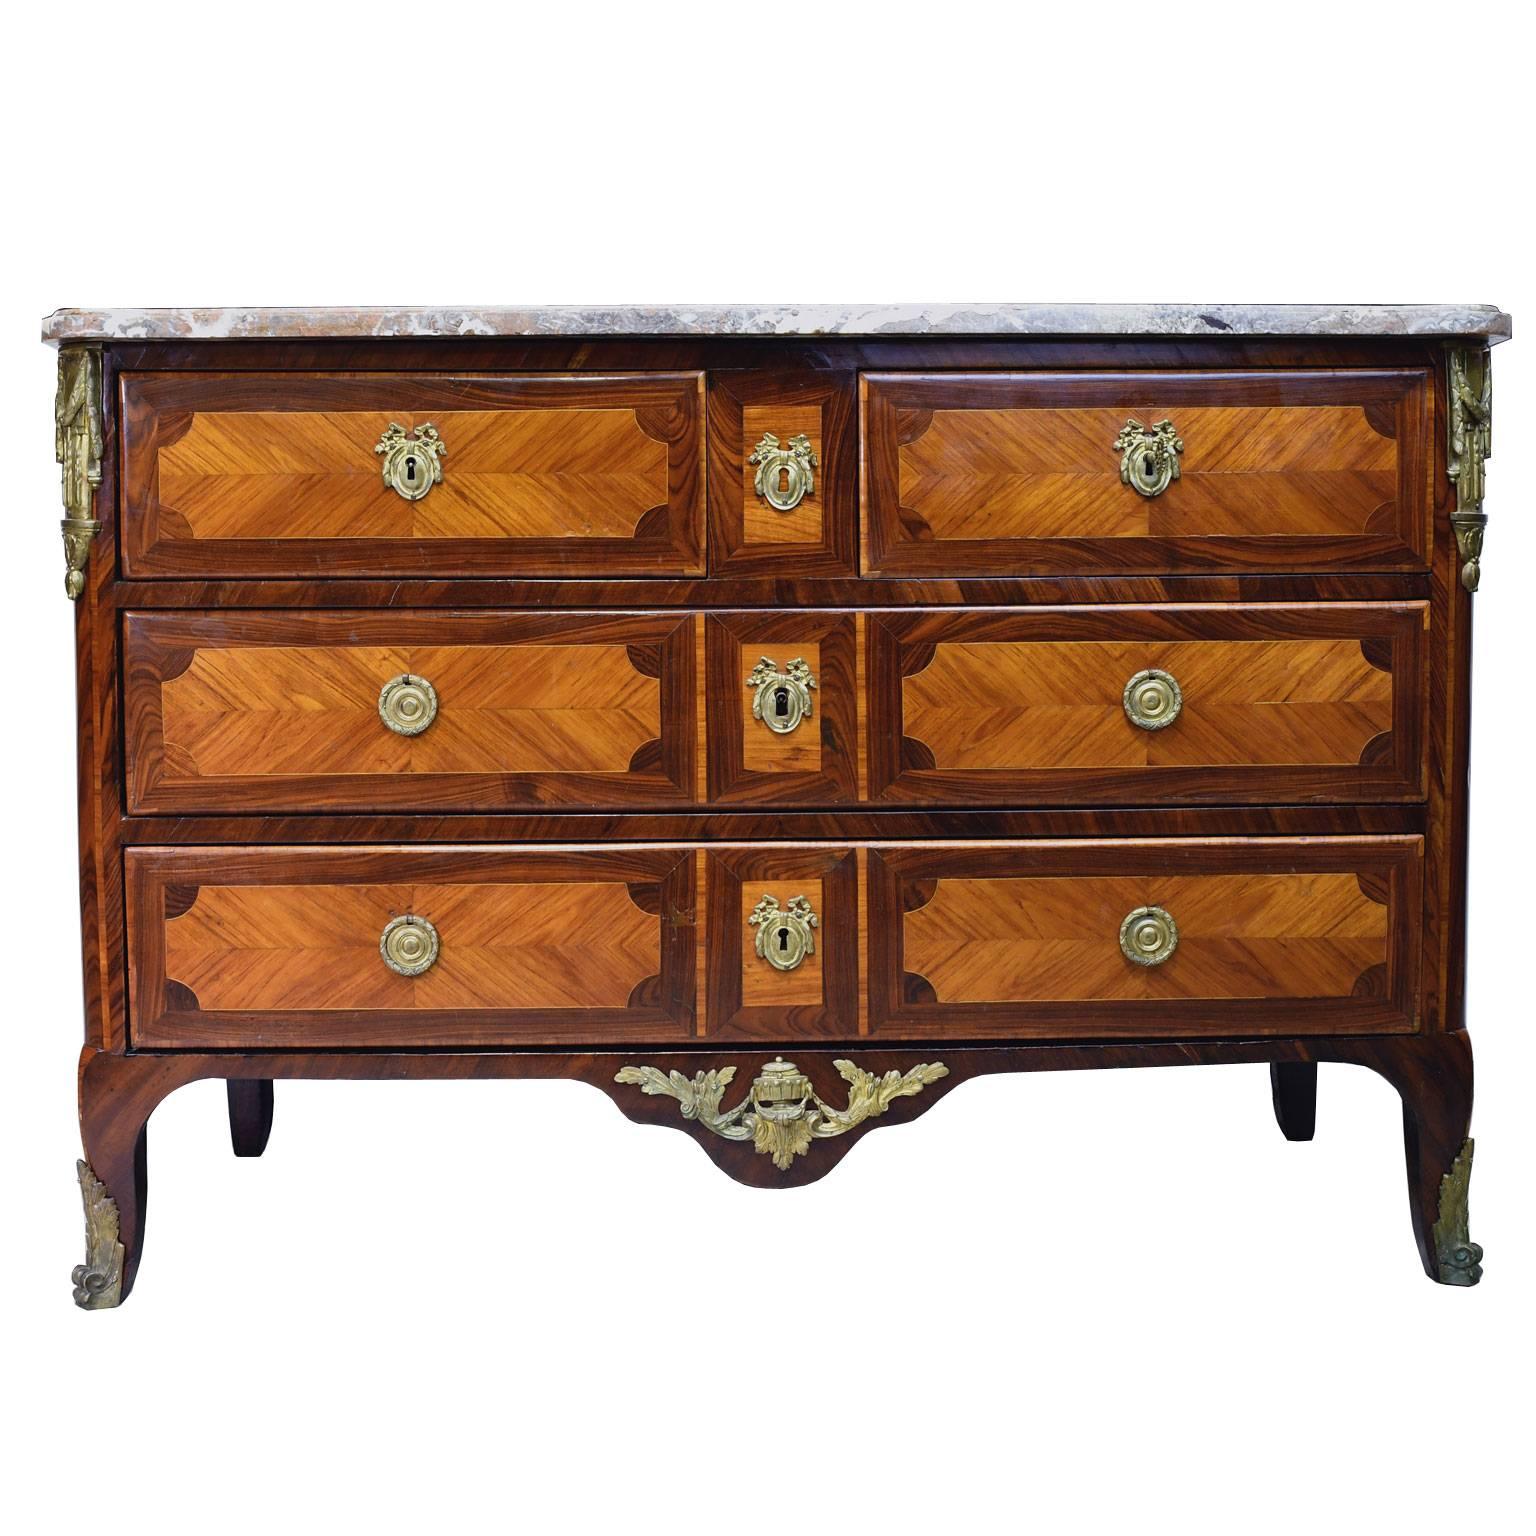 A stunning French commode with parquetry inlays in kingwood, rosewood and tulipwood, with bronze doré ormolu, original marble top and hardware. Chest is in a transitional form that references but departs from the rococo style of Louis XV, and